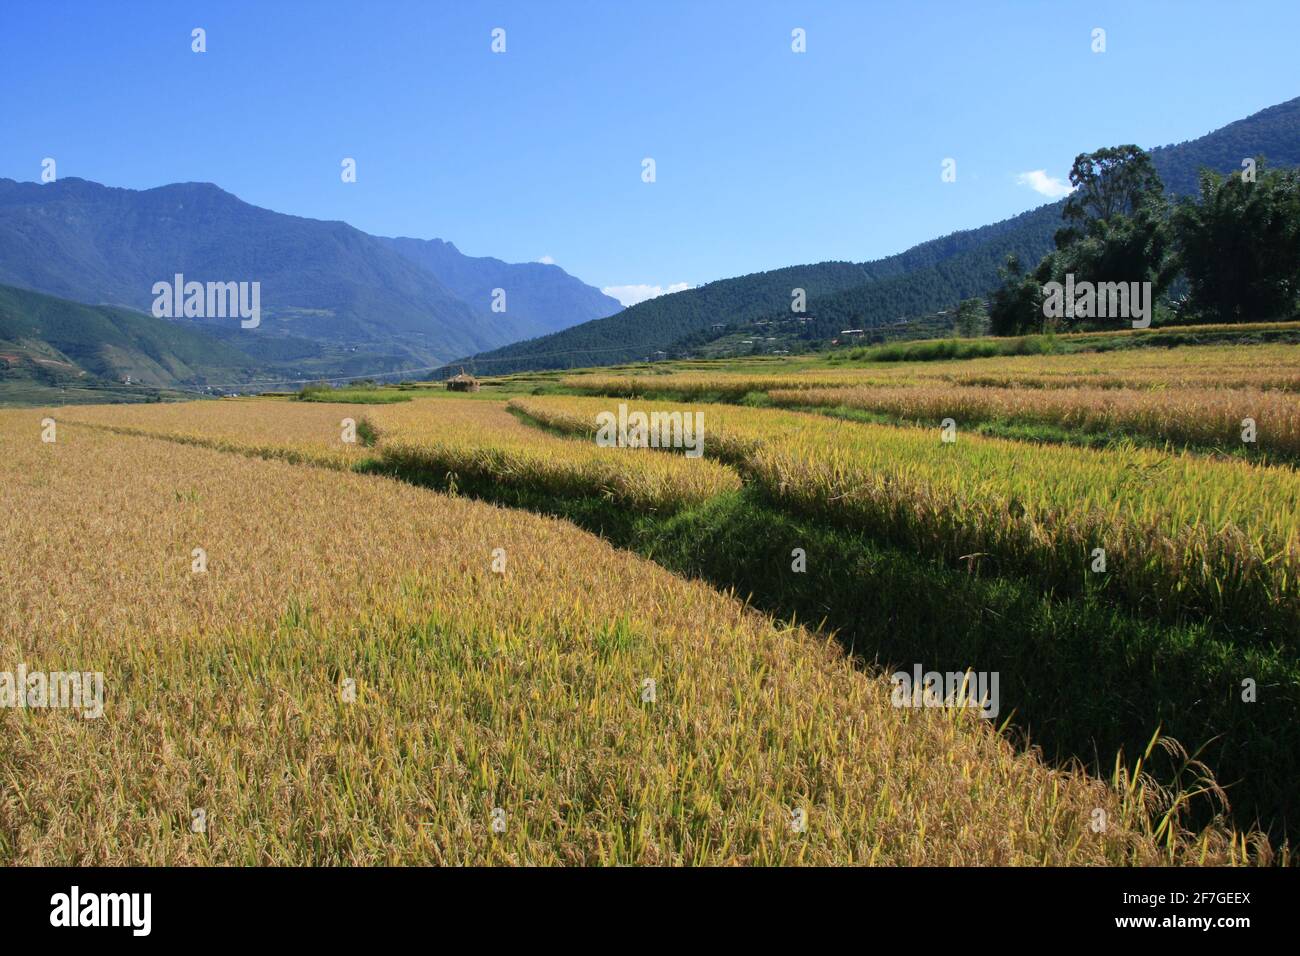 Rice terraces fields lush green and yellow, harvest ripe, rice on hill, slope, mountain, mountain village, farmers, rice farmers in Asia, beauty panor Stock Photo